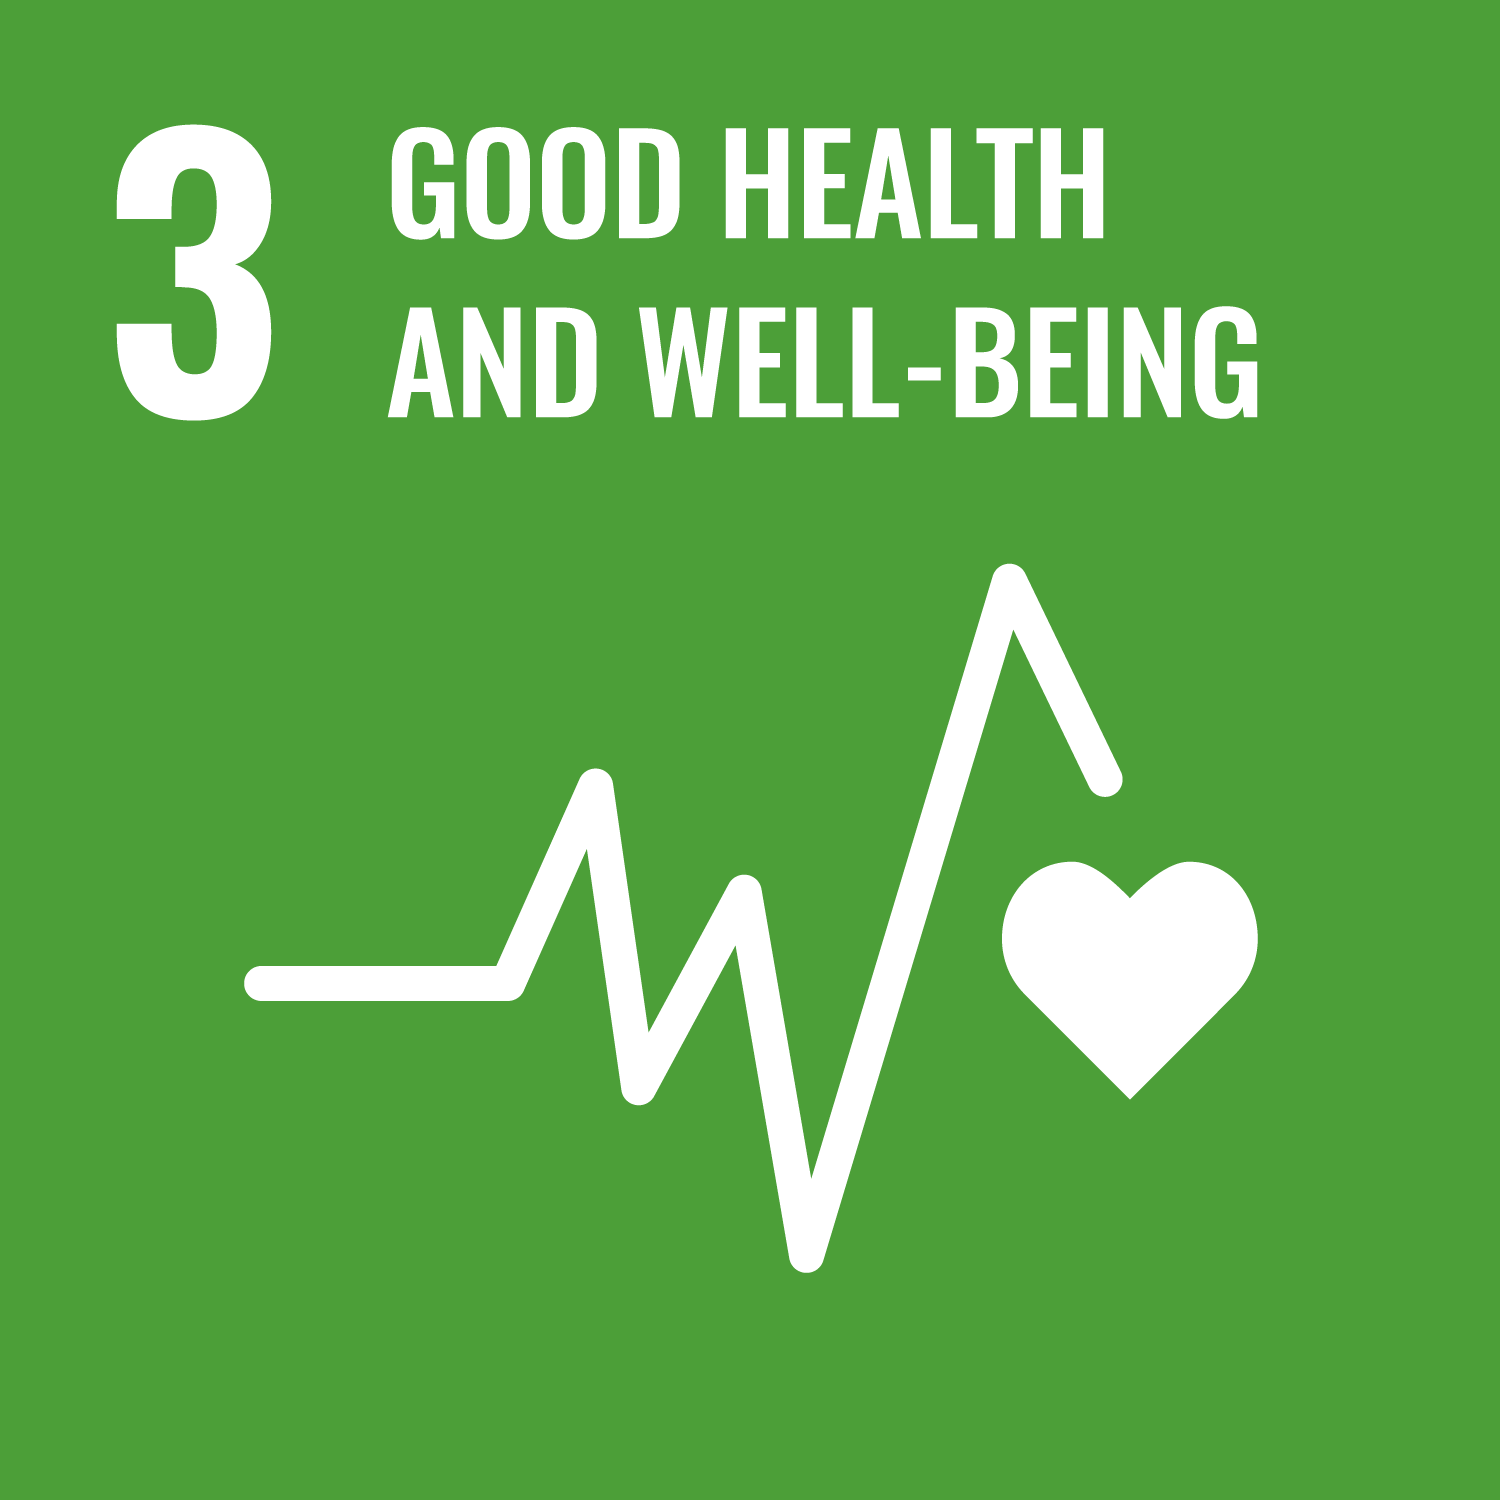 Good Health and Well-Being SDG Graphic